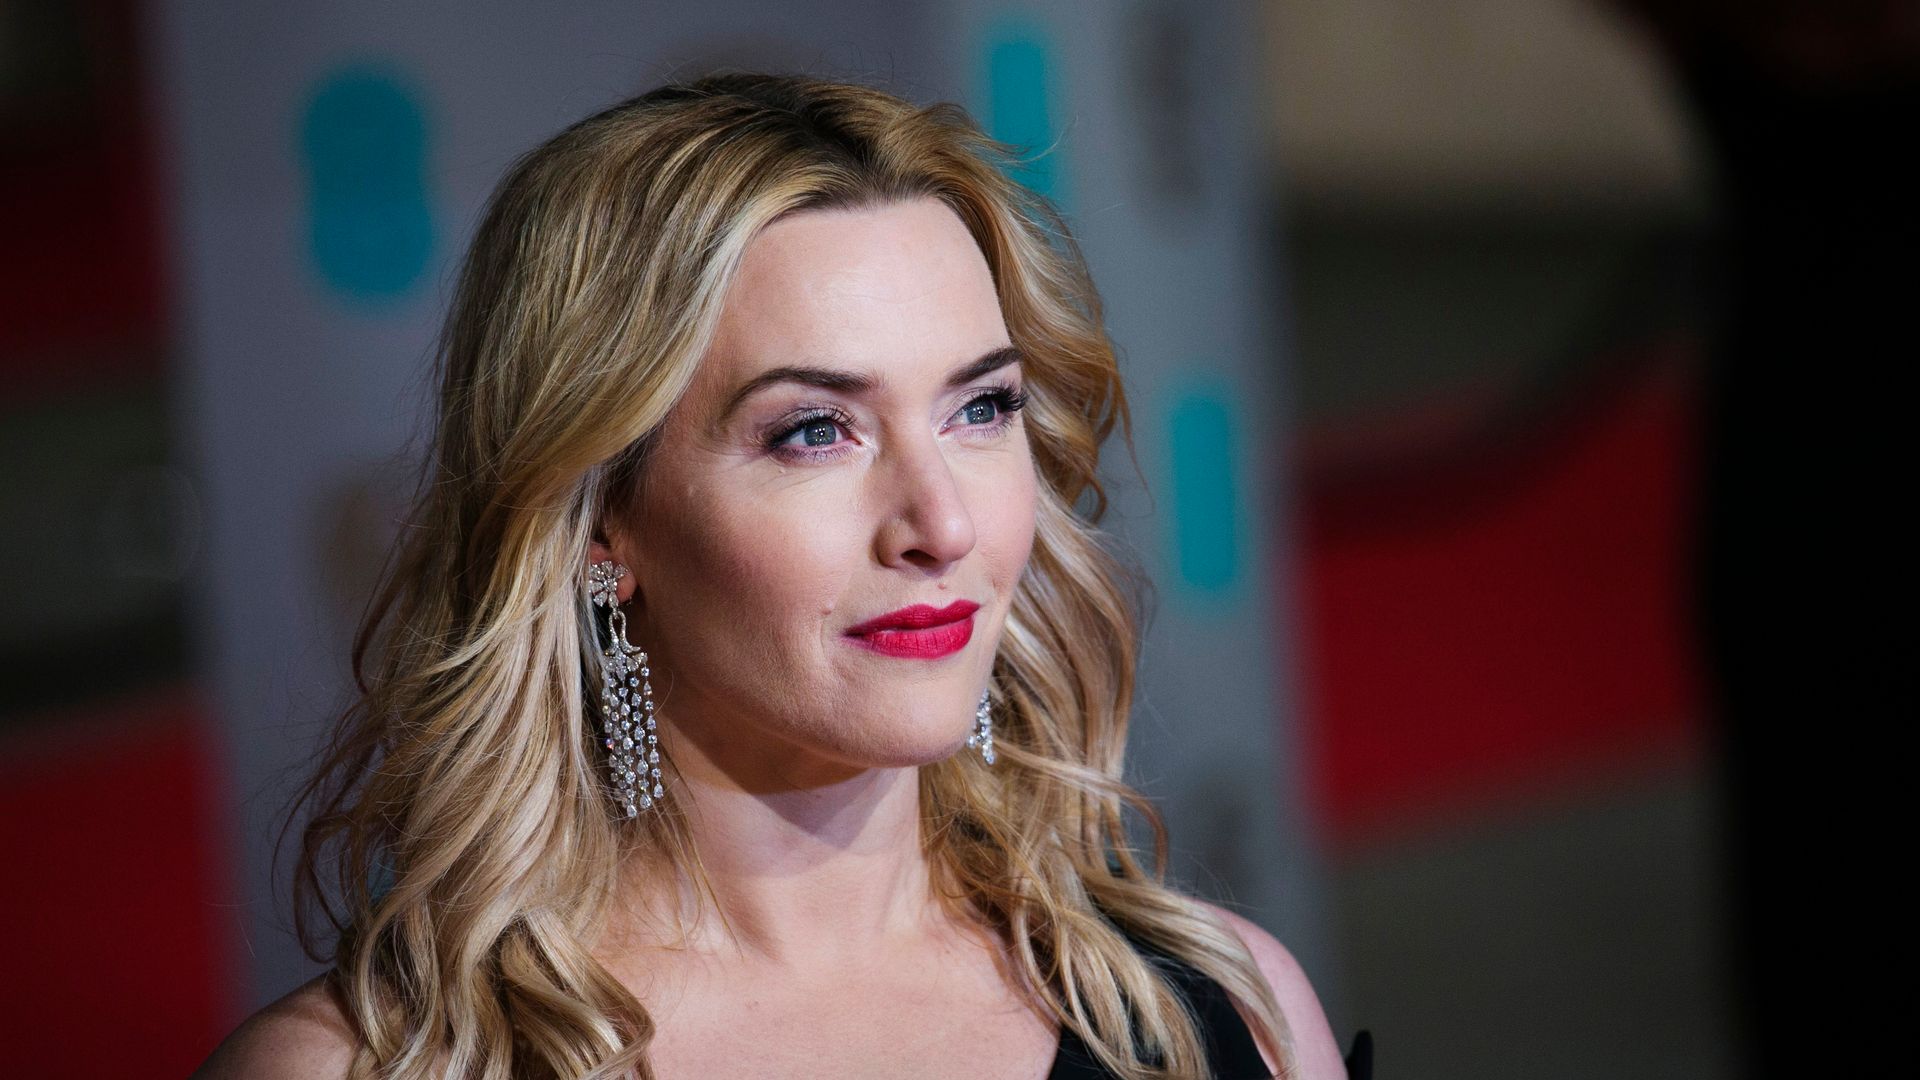 Kate Winslet attends the EE British Academy Film Awards at The Royal Opera House on February 14, 2016 in London, England.